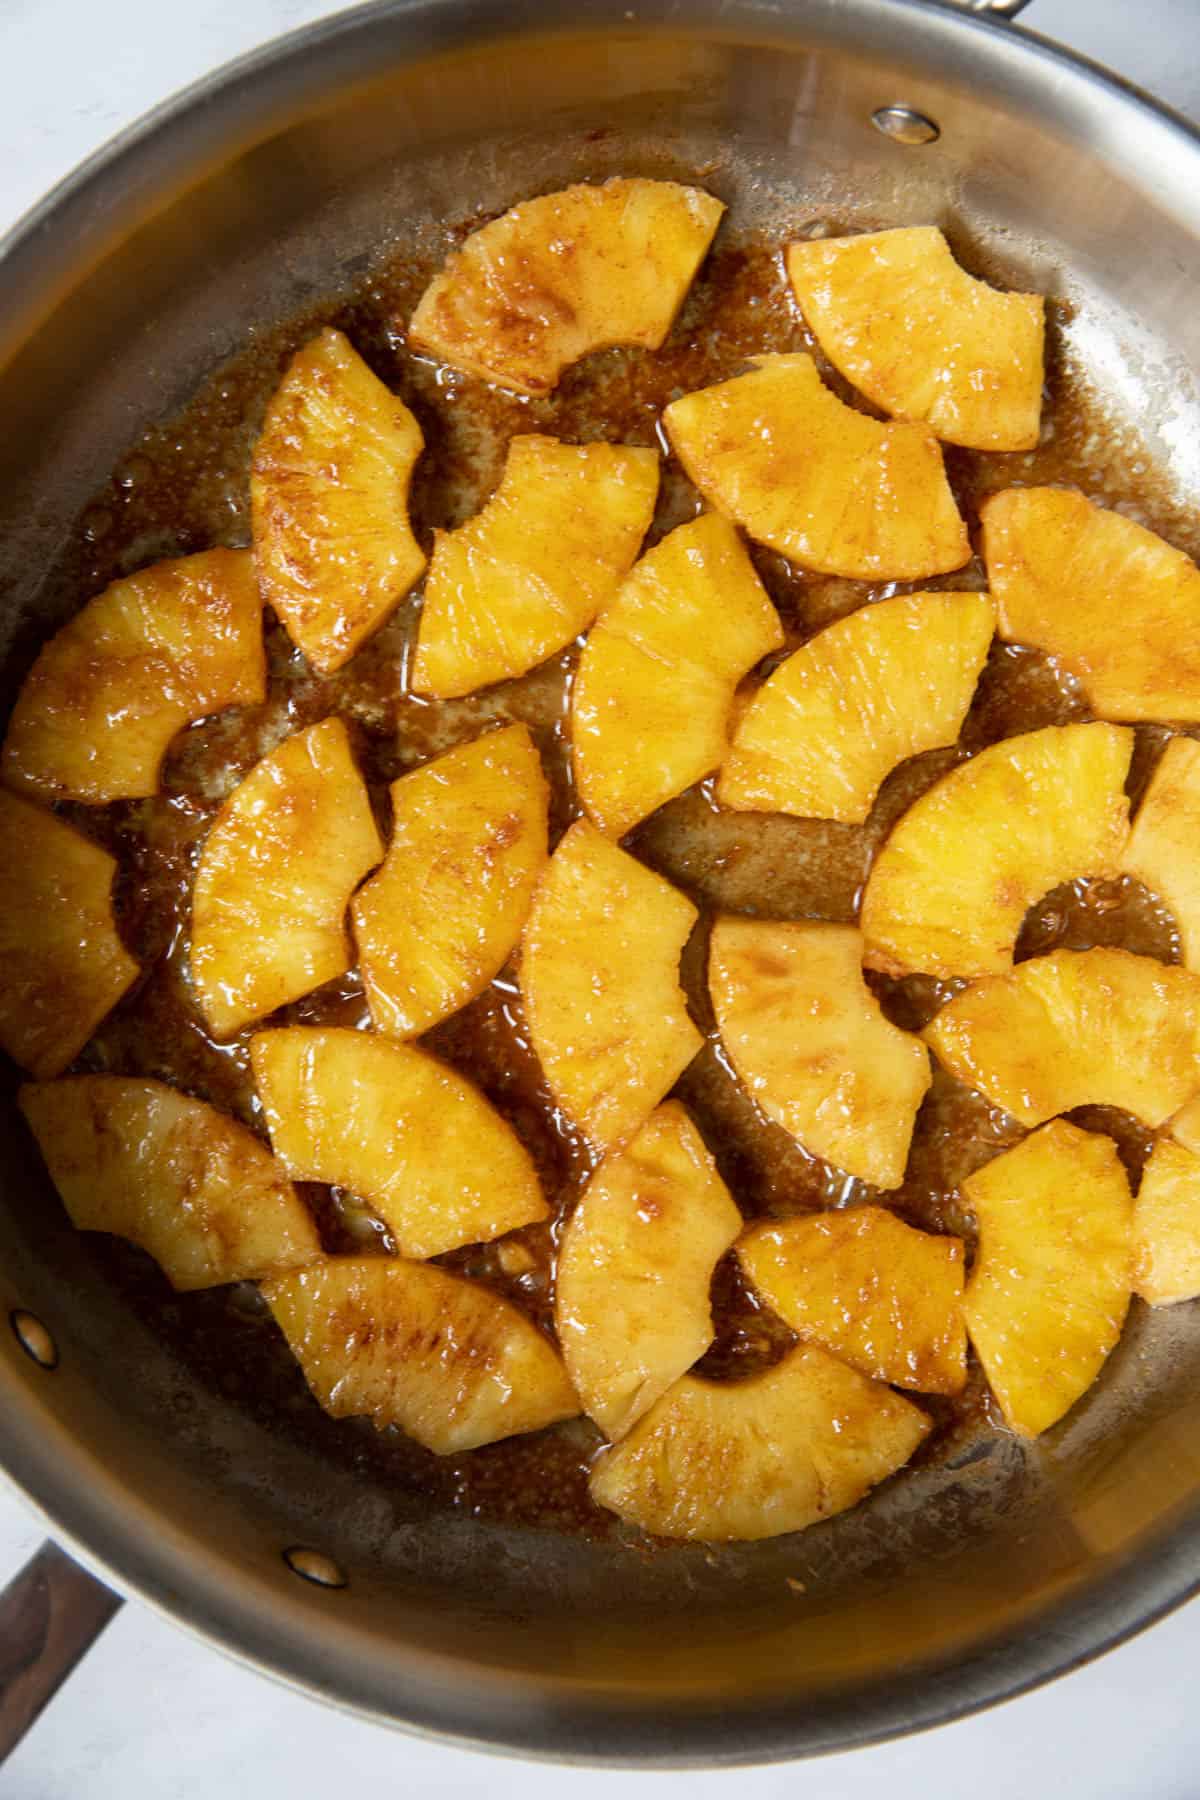 The prepare pineapple in a skillet for cooking in the butter.